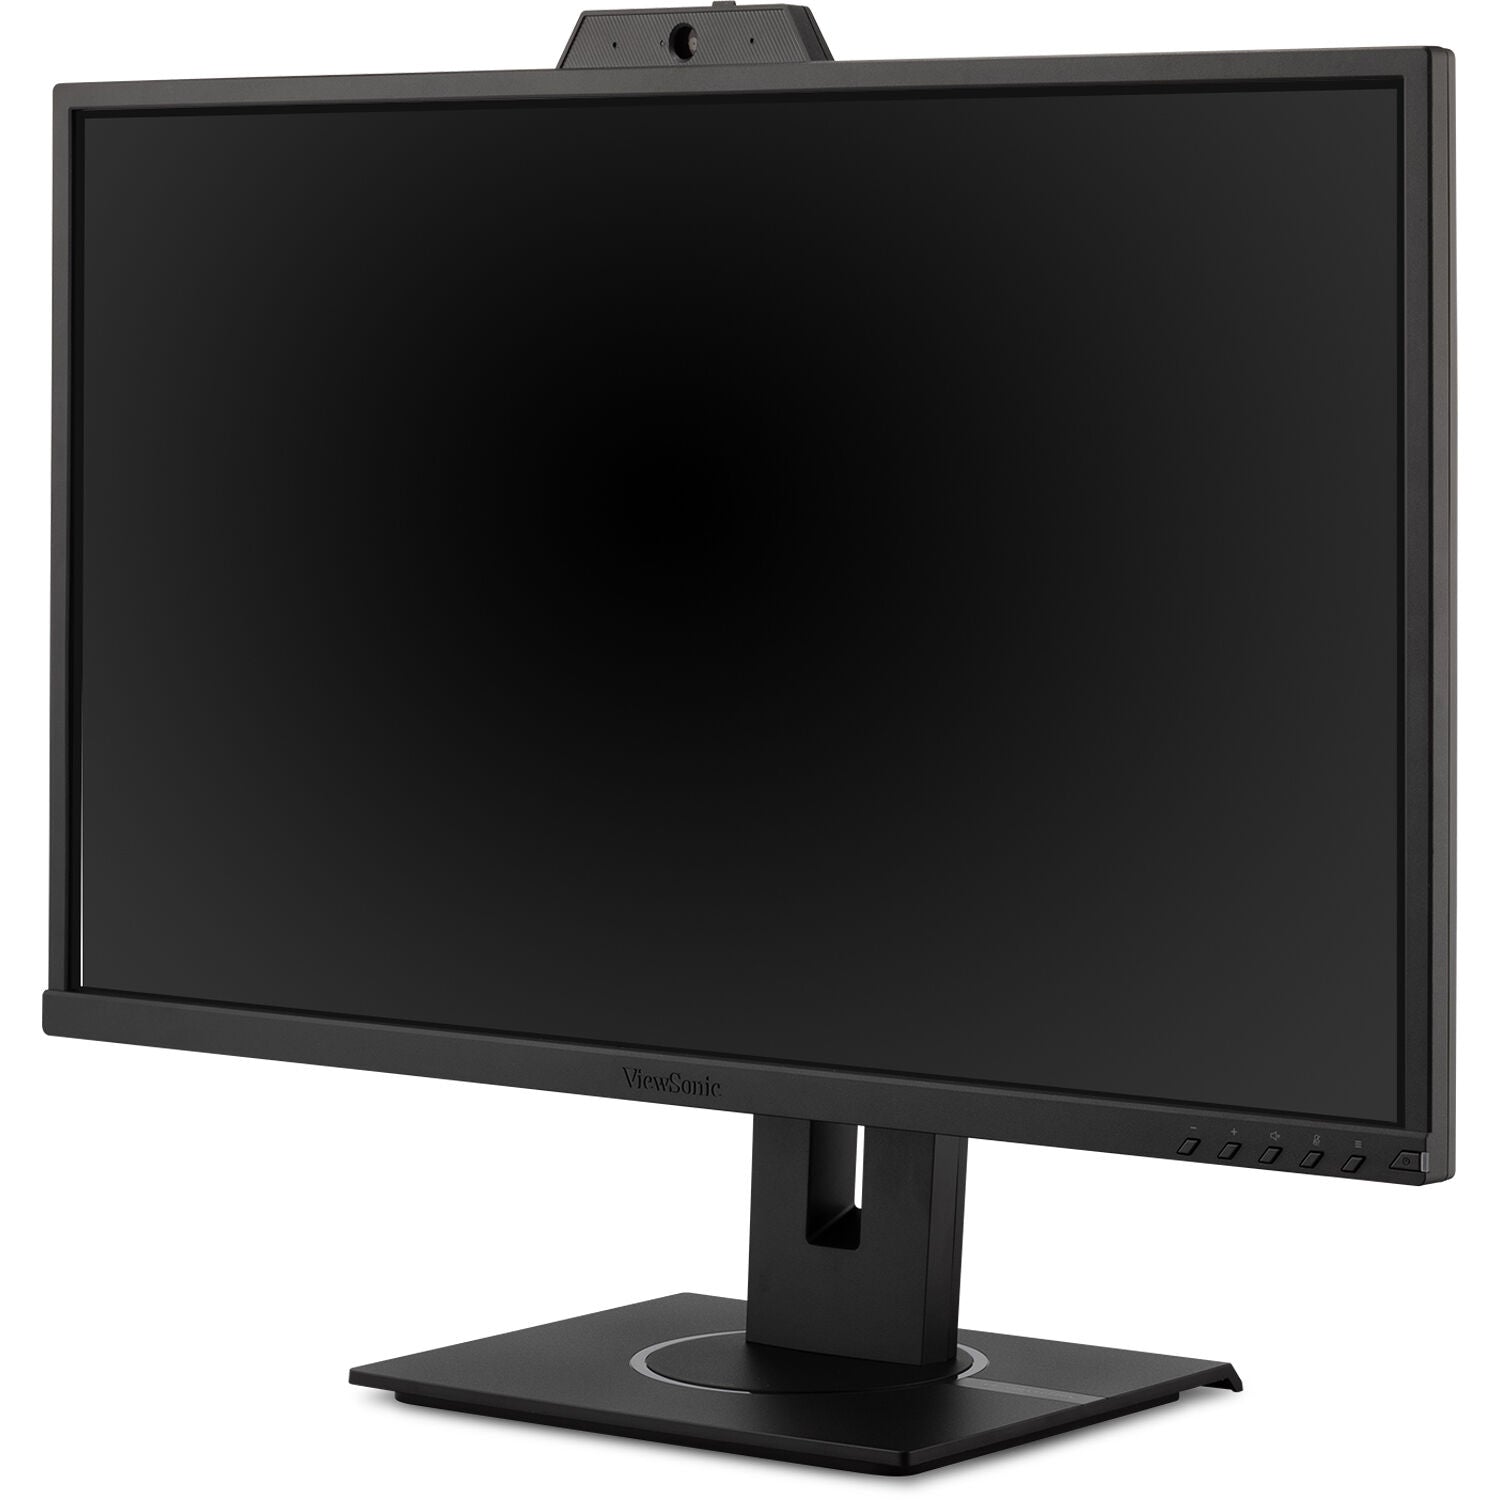 ViewSonic VG2740V-S 27" 1080p IPS Home and Office Video Conferencing Monitor - Certified Refurbished